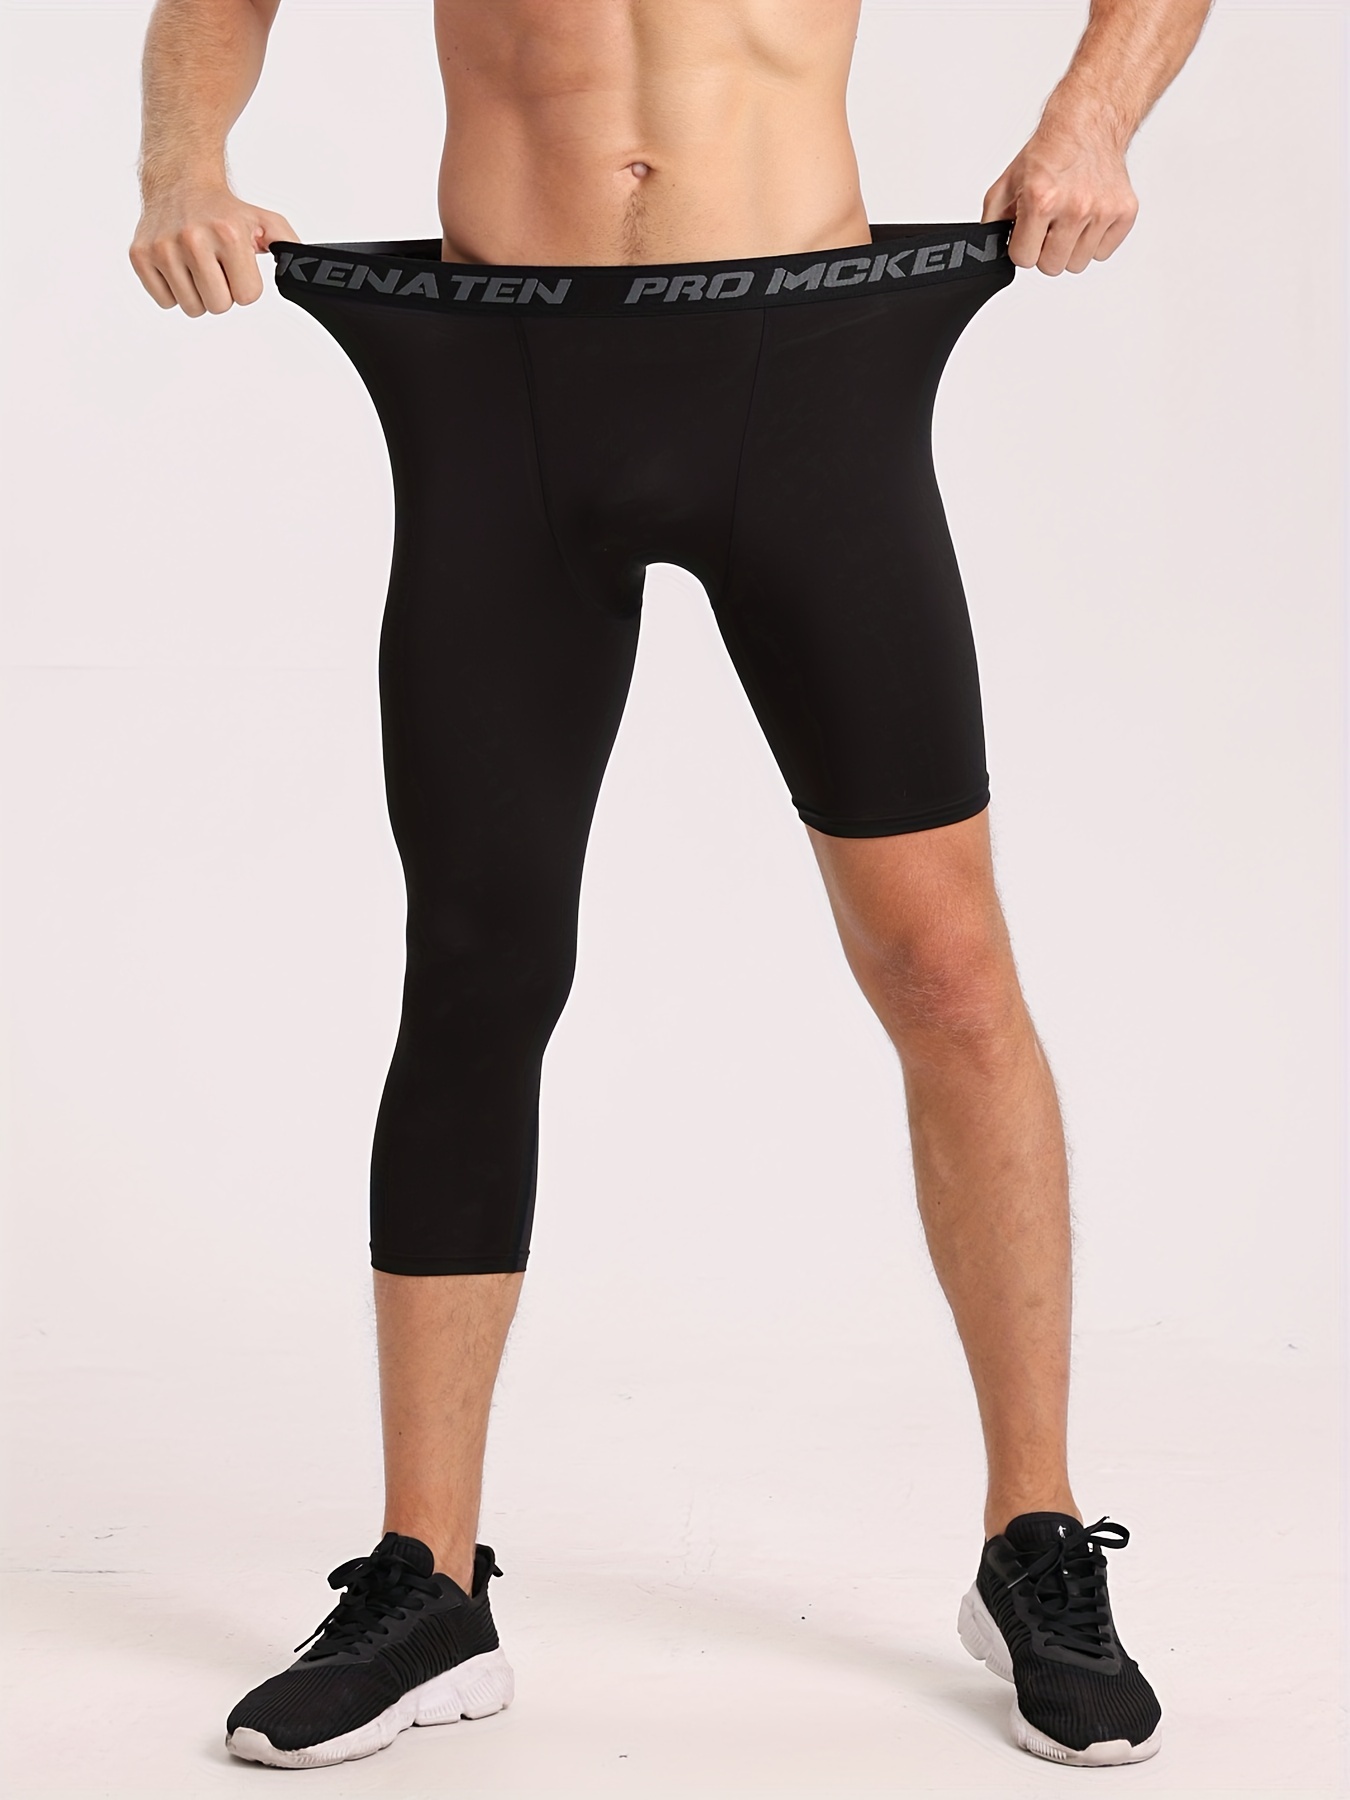 Mens One Leg Leggings, 3/4 Compression Pants, Base Layer Legging Tights  Wick Sweat Away Quickly for Outdoor Sports